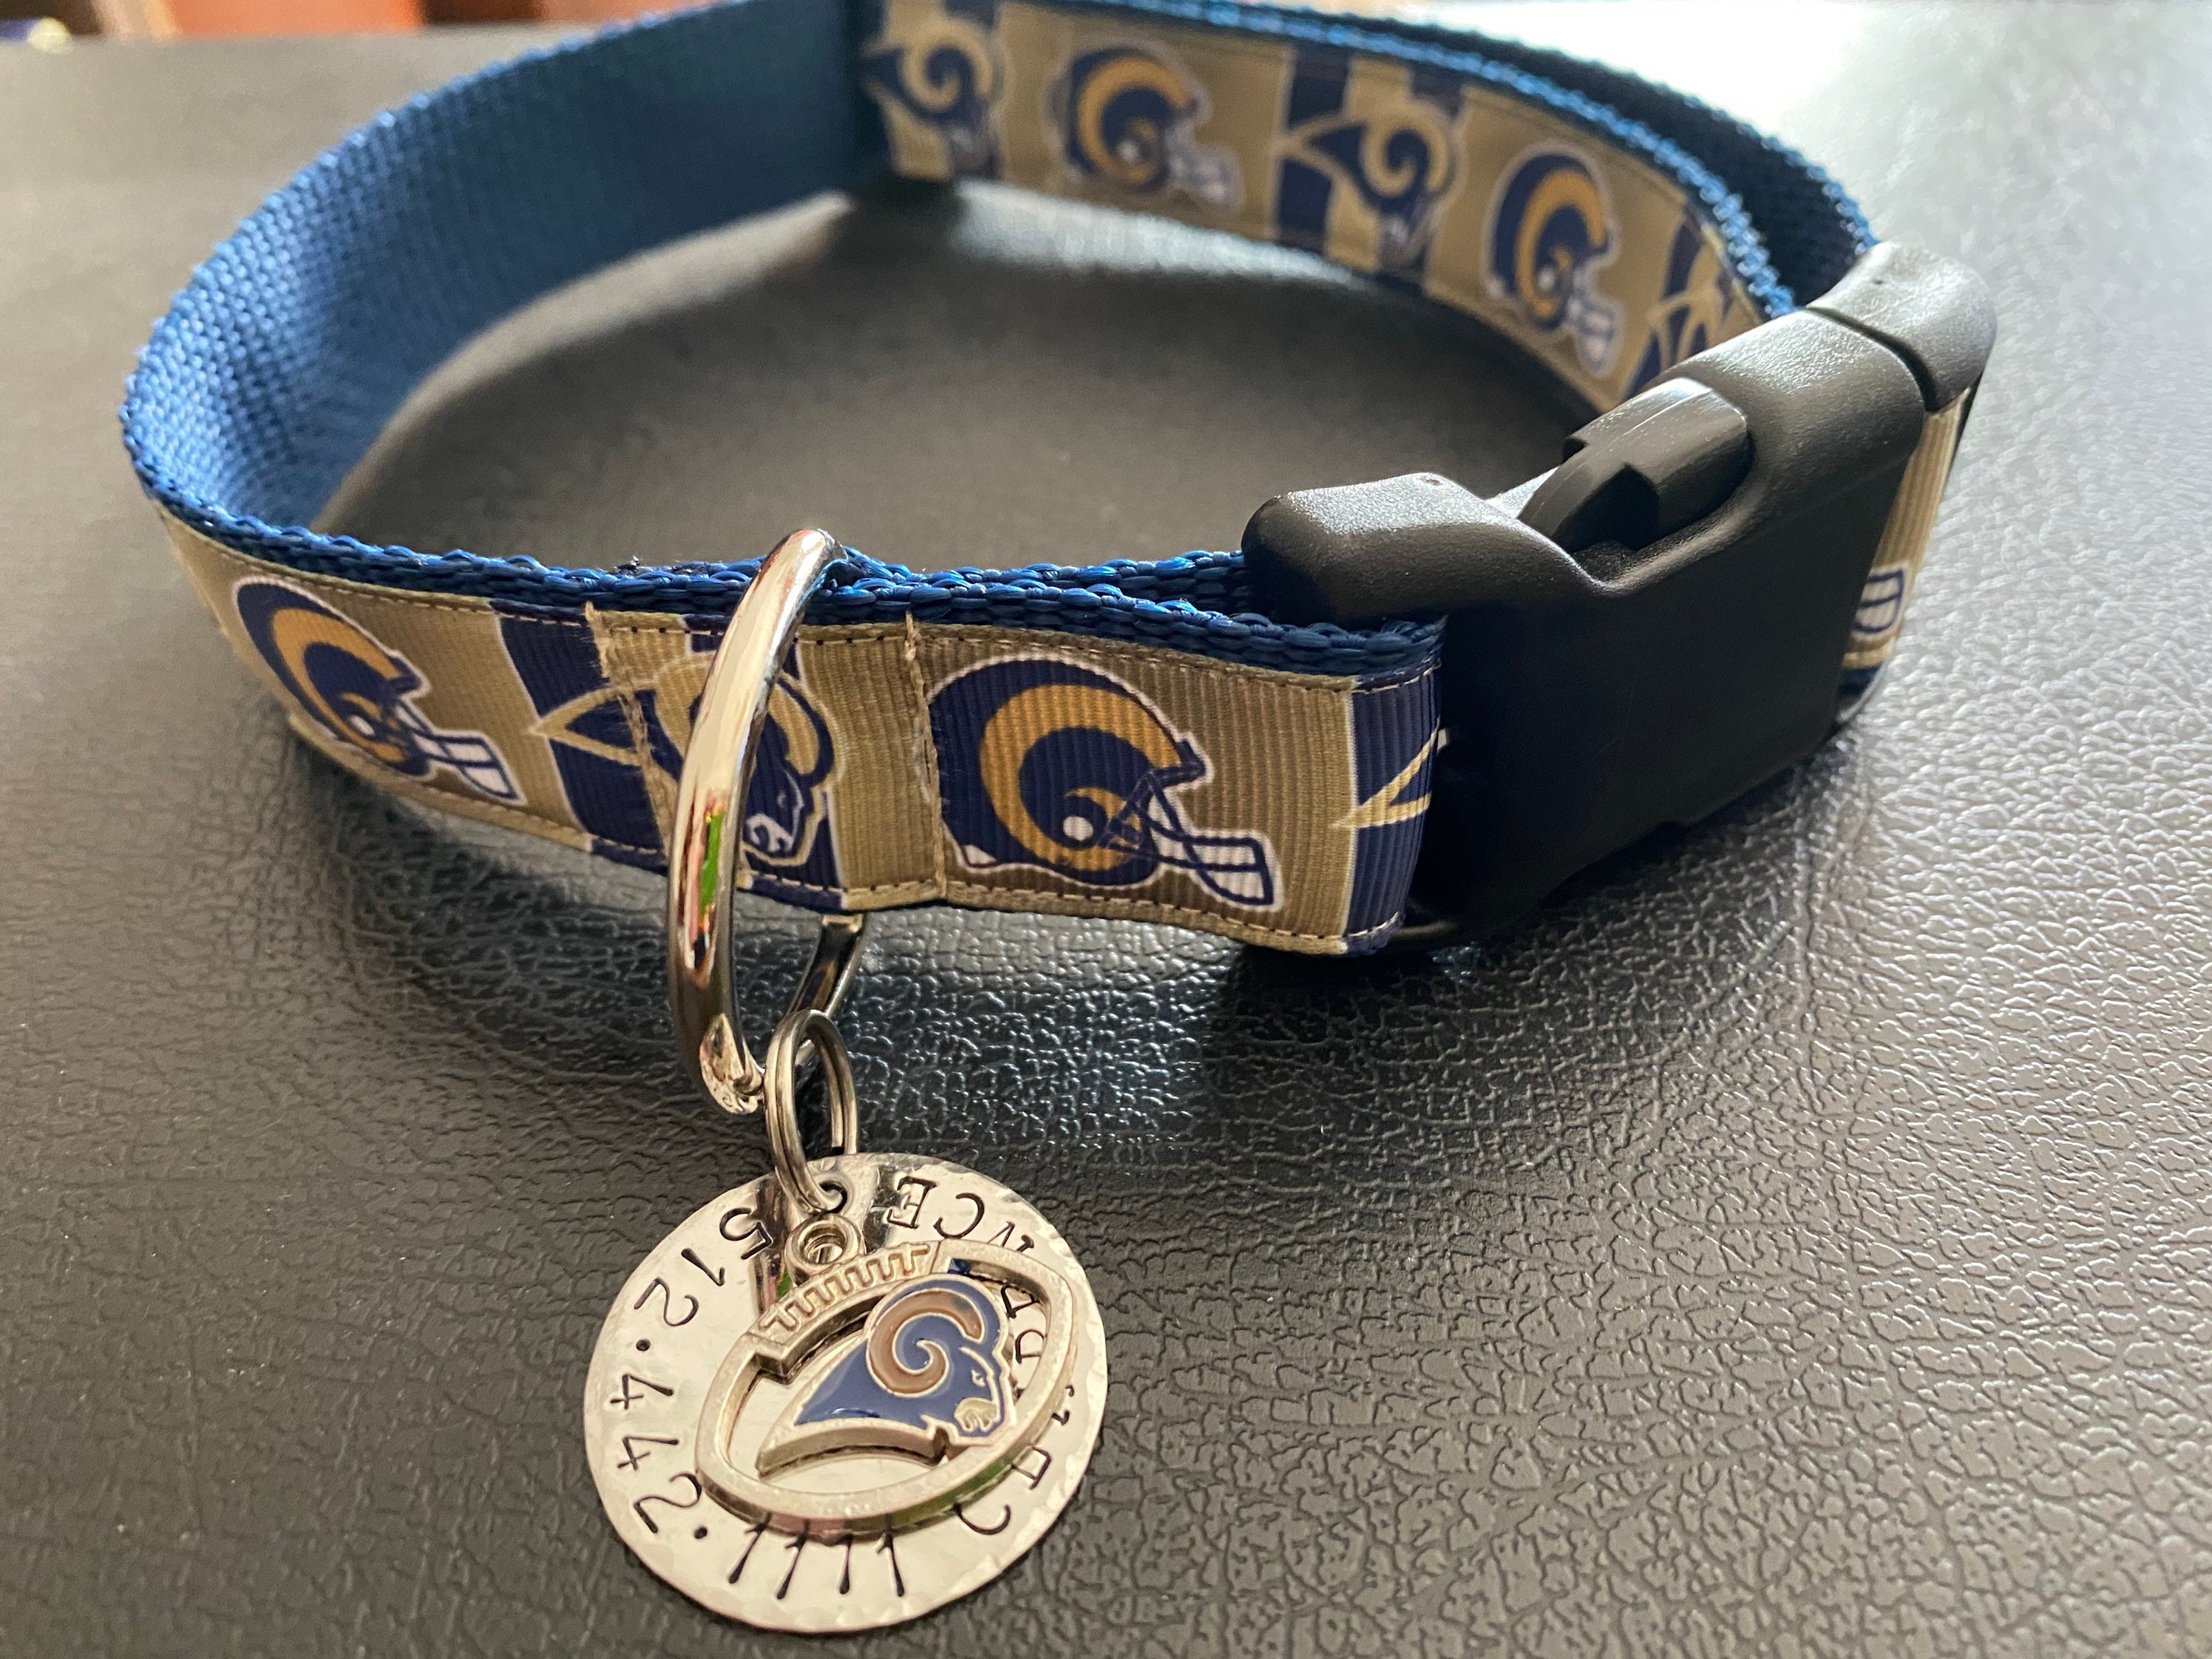 Los Angeles La Rams Pet Collar With Optional Personalized Id Tag. Custom & Adjustable For Dog Or Cat